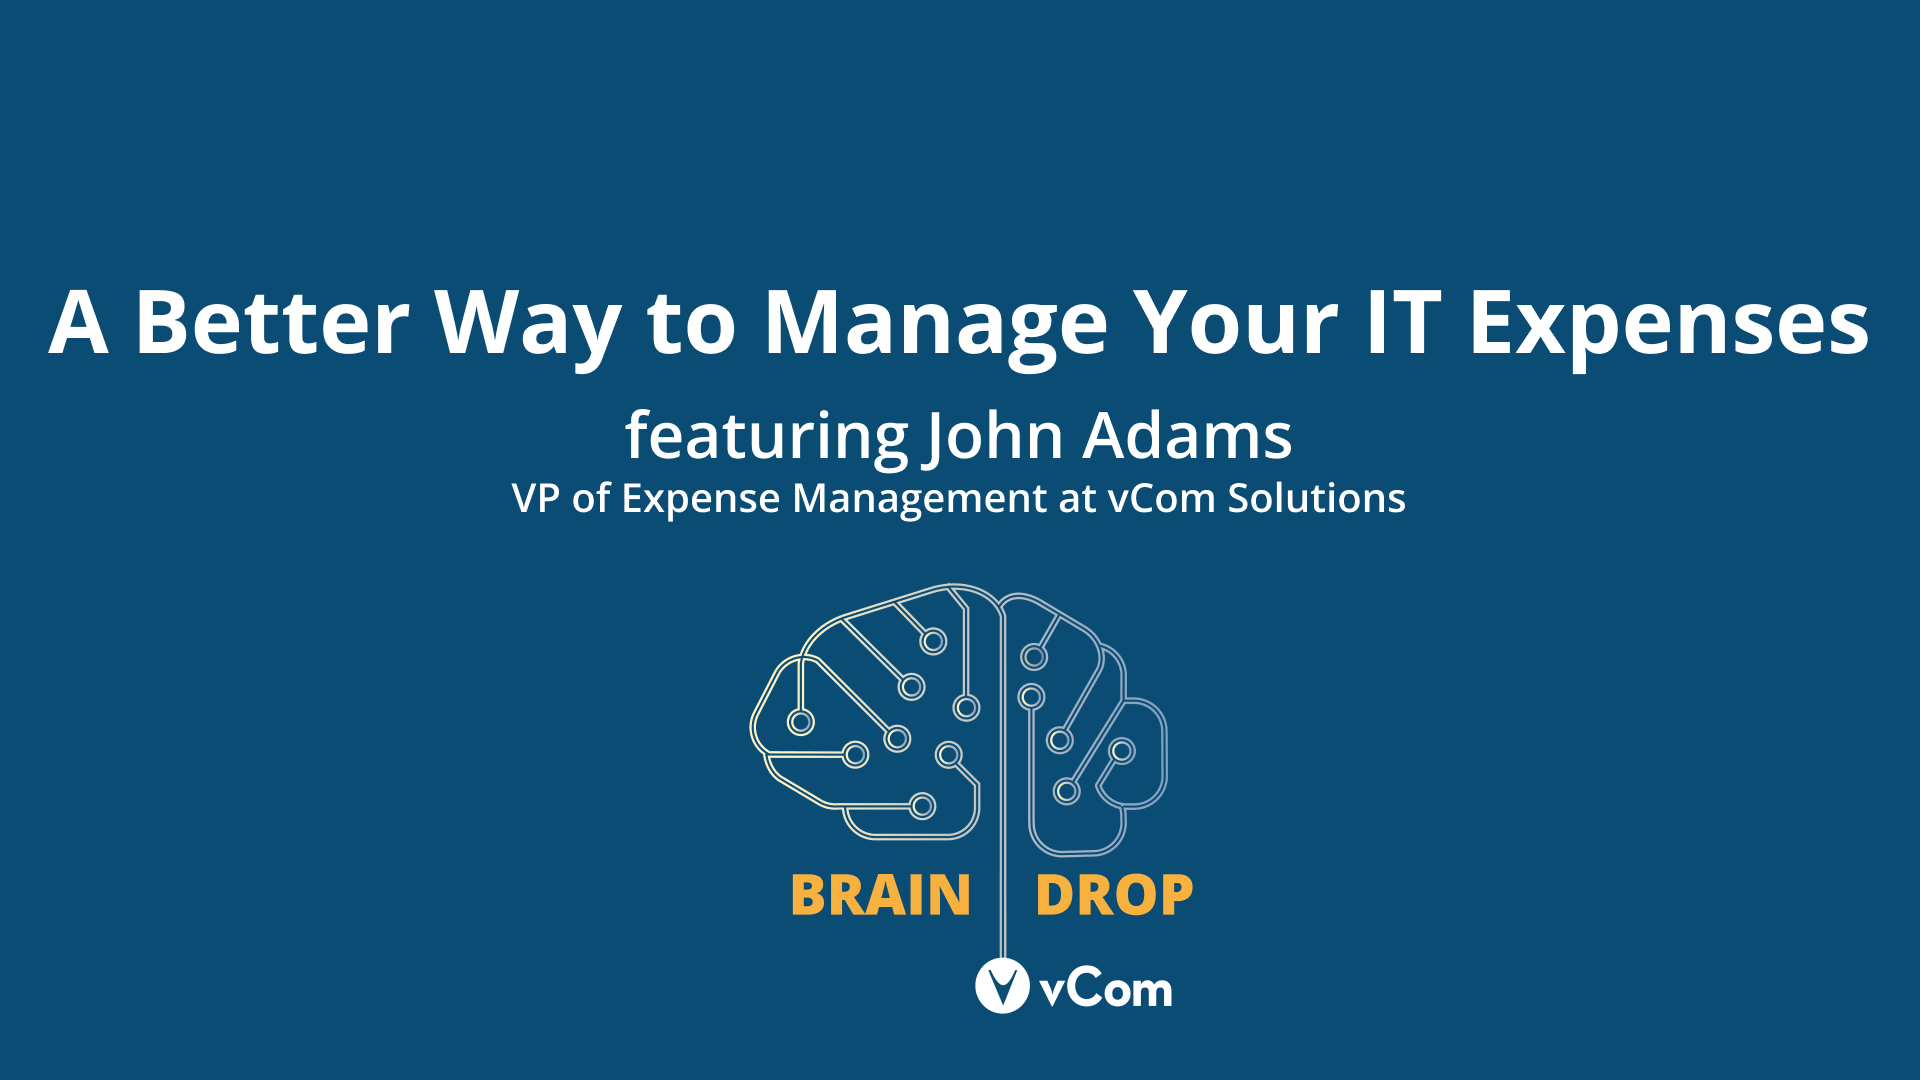 A Better Way to Manage Your IT Expenses with John Adams